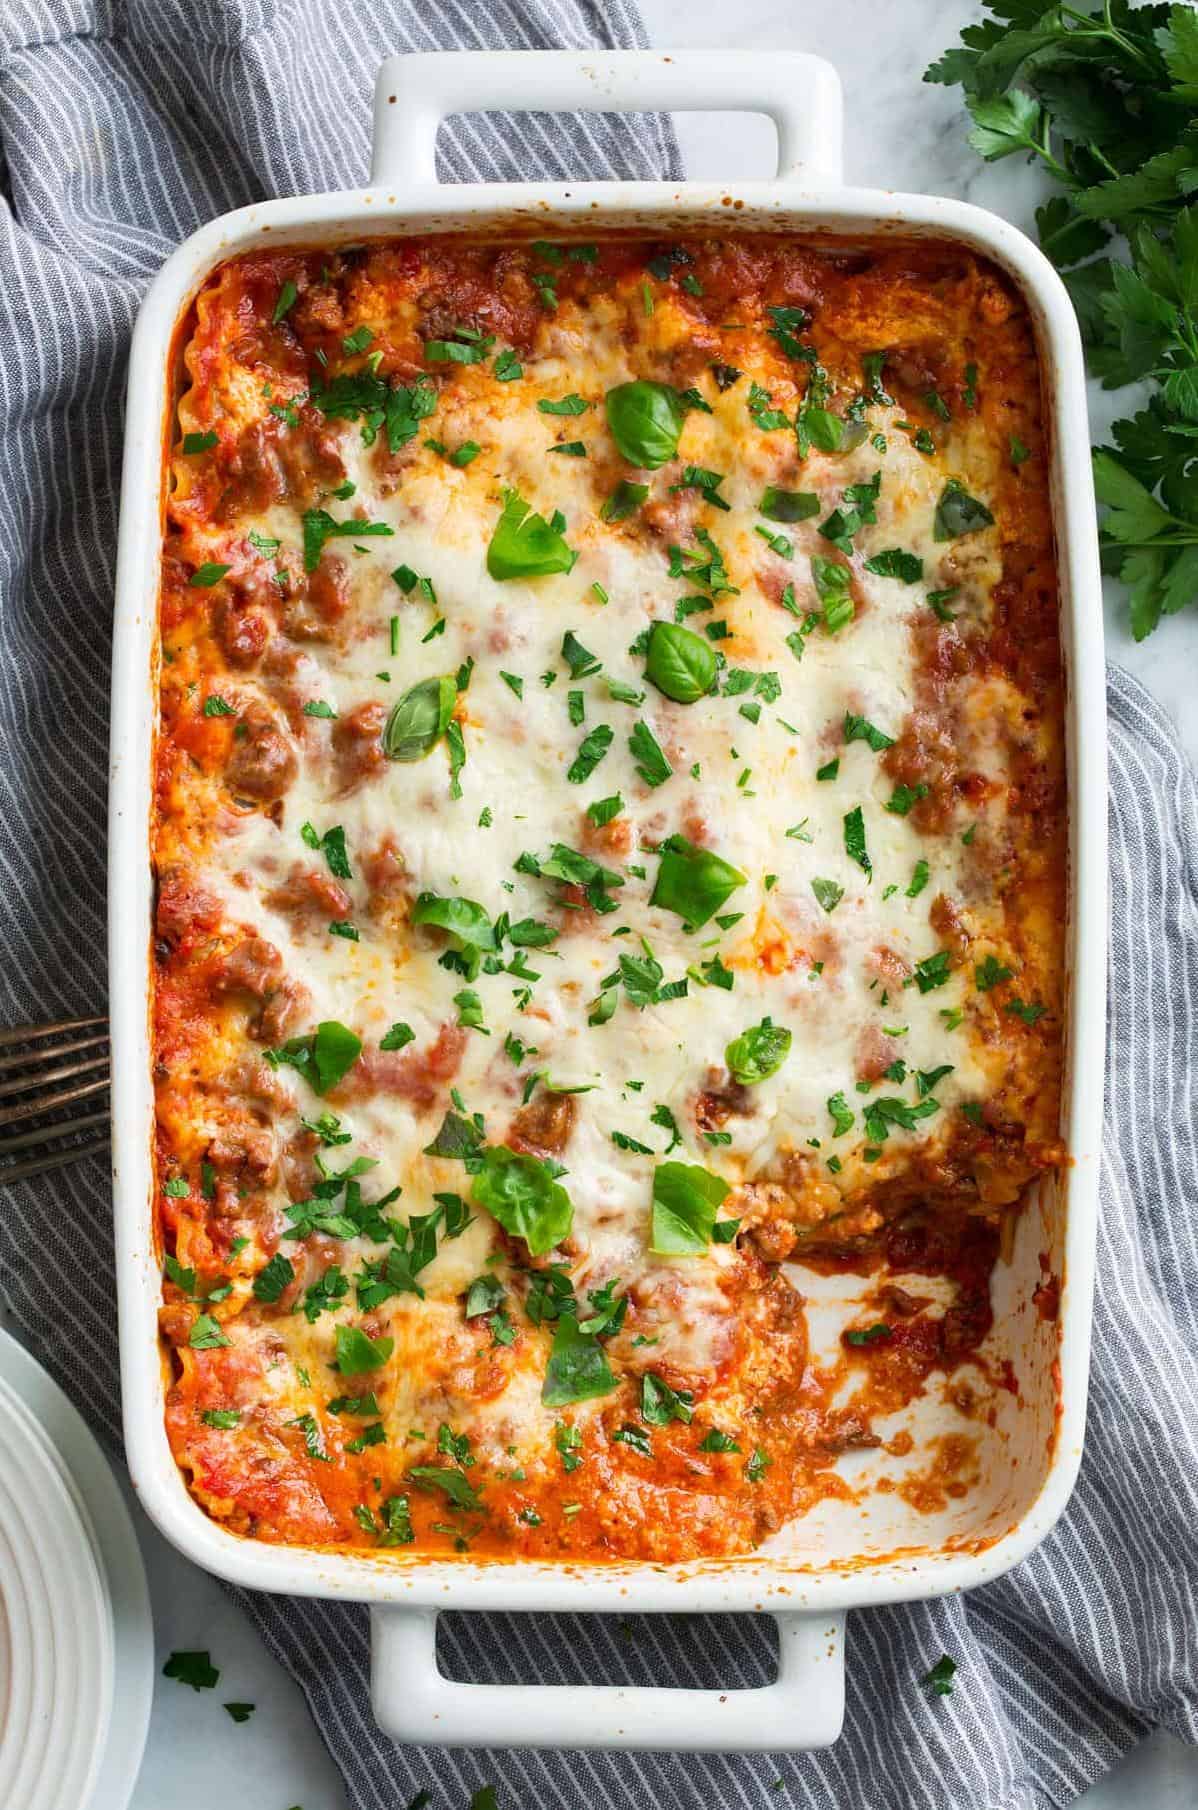  This classic Italian dish will become a crowd favorite at your next dinner party.